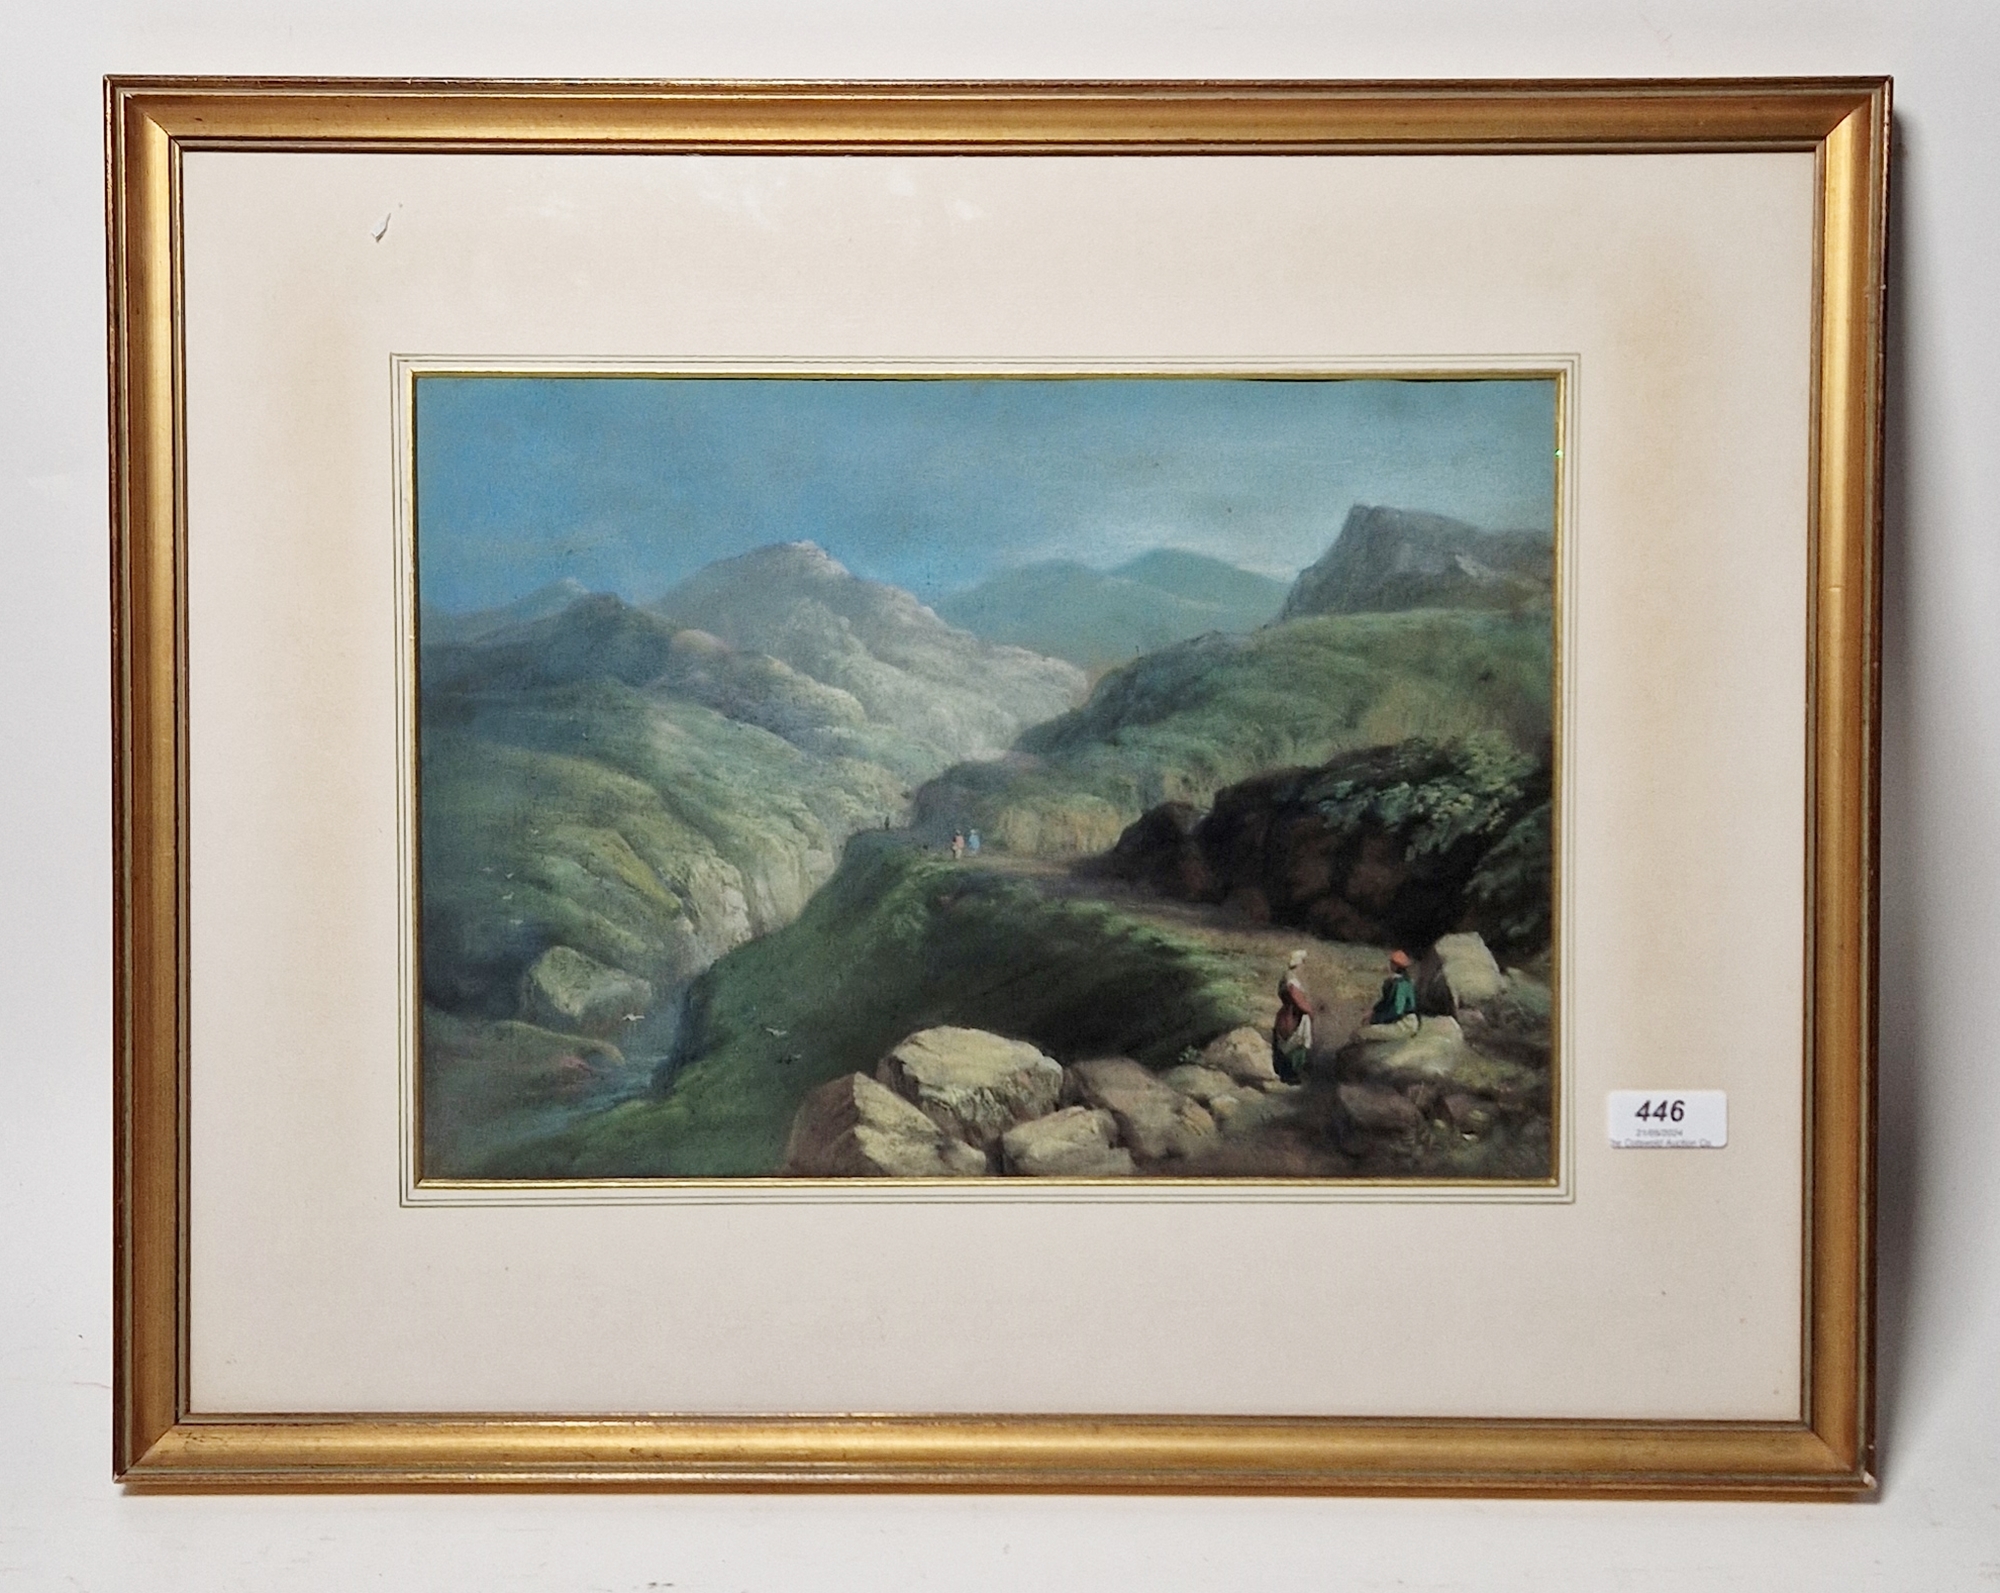 19th century continental school Pastel on paper Mountain scape with figures on a path, - Image 2 of 4